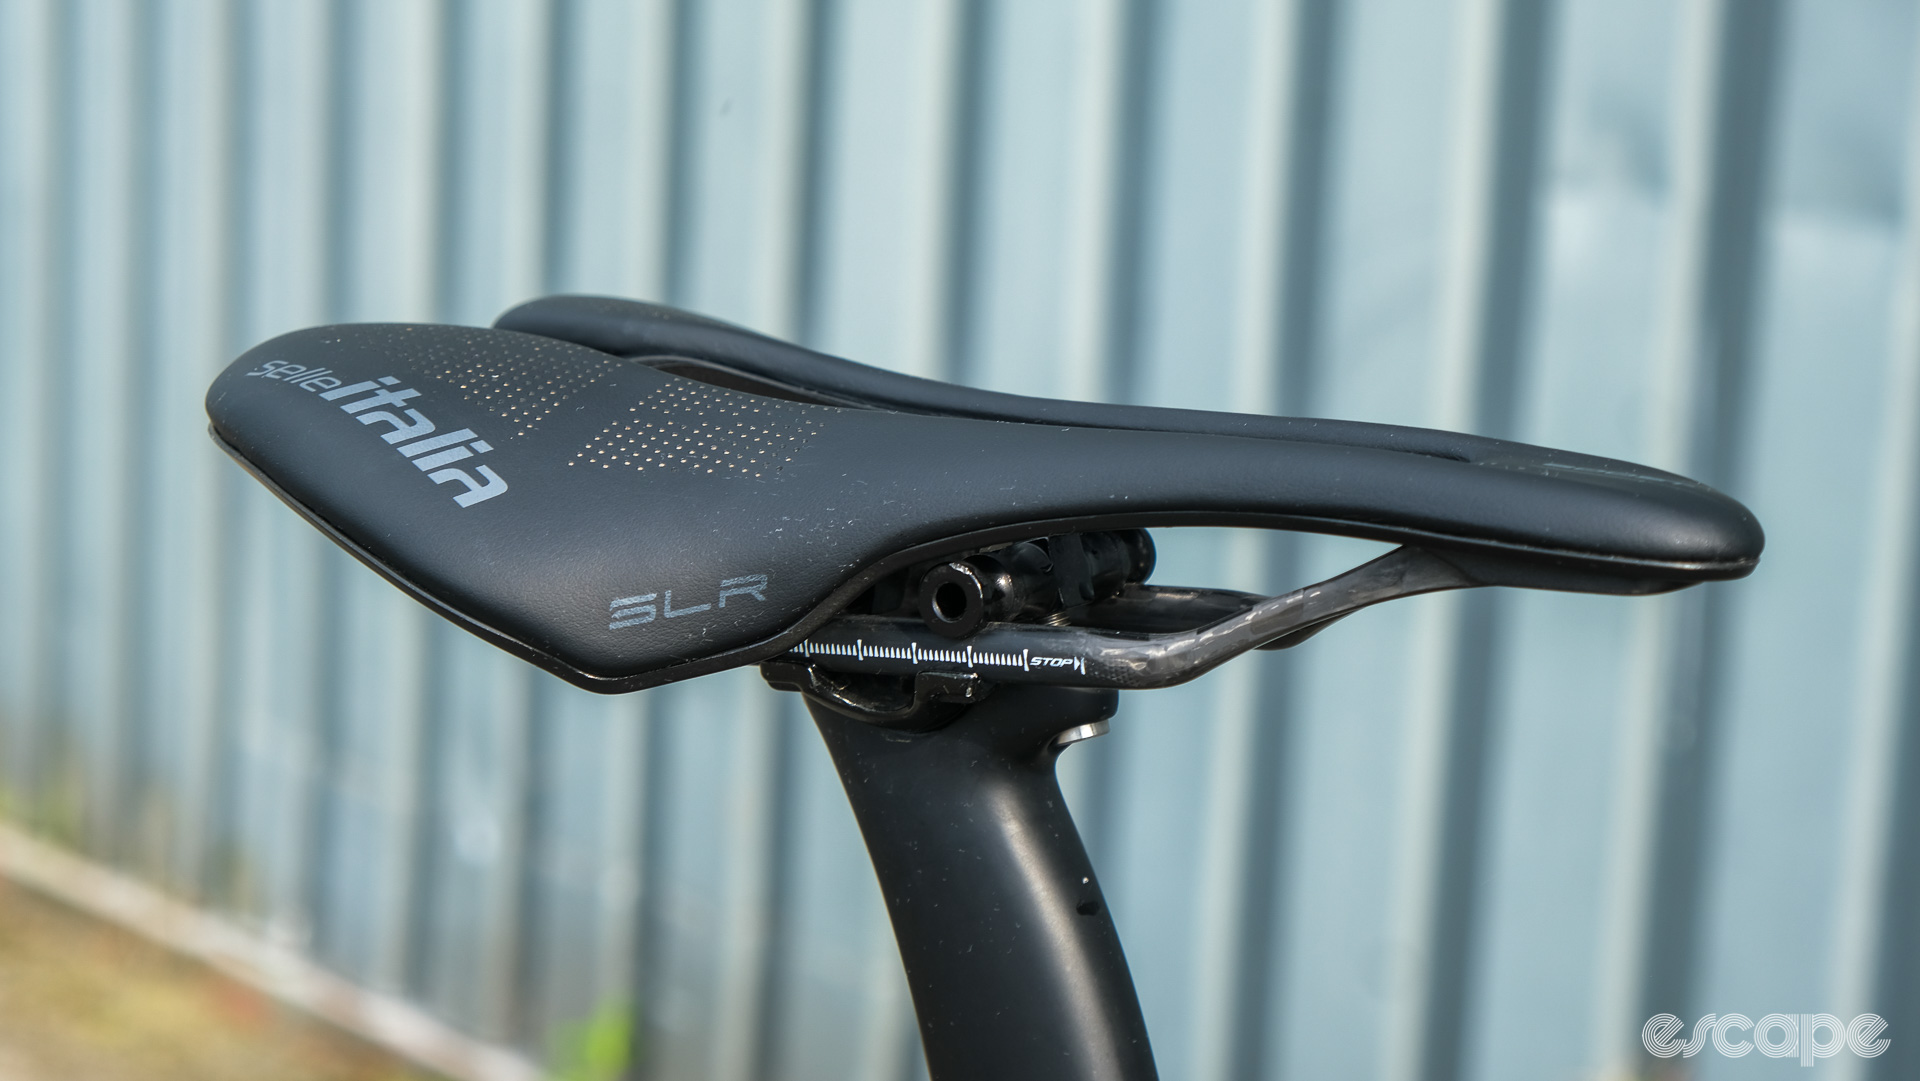 The Falcn RS comes with a Selle Italia SLR Boost saddle, which features a wide, flat rear shape, center cutout, and carbon fiber rails.